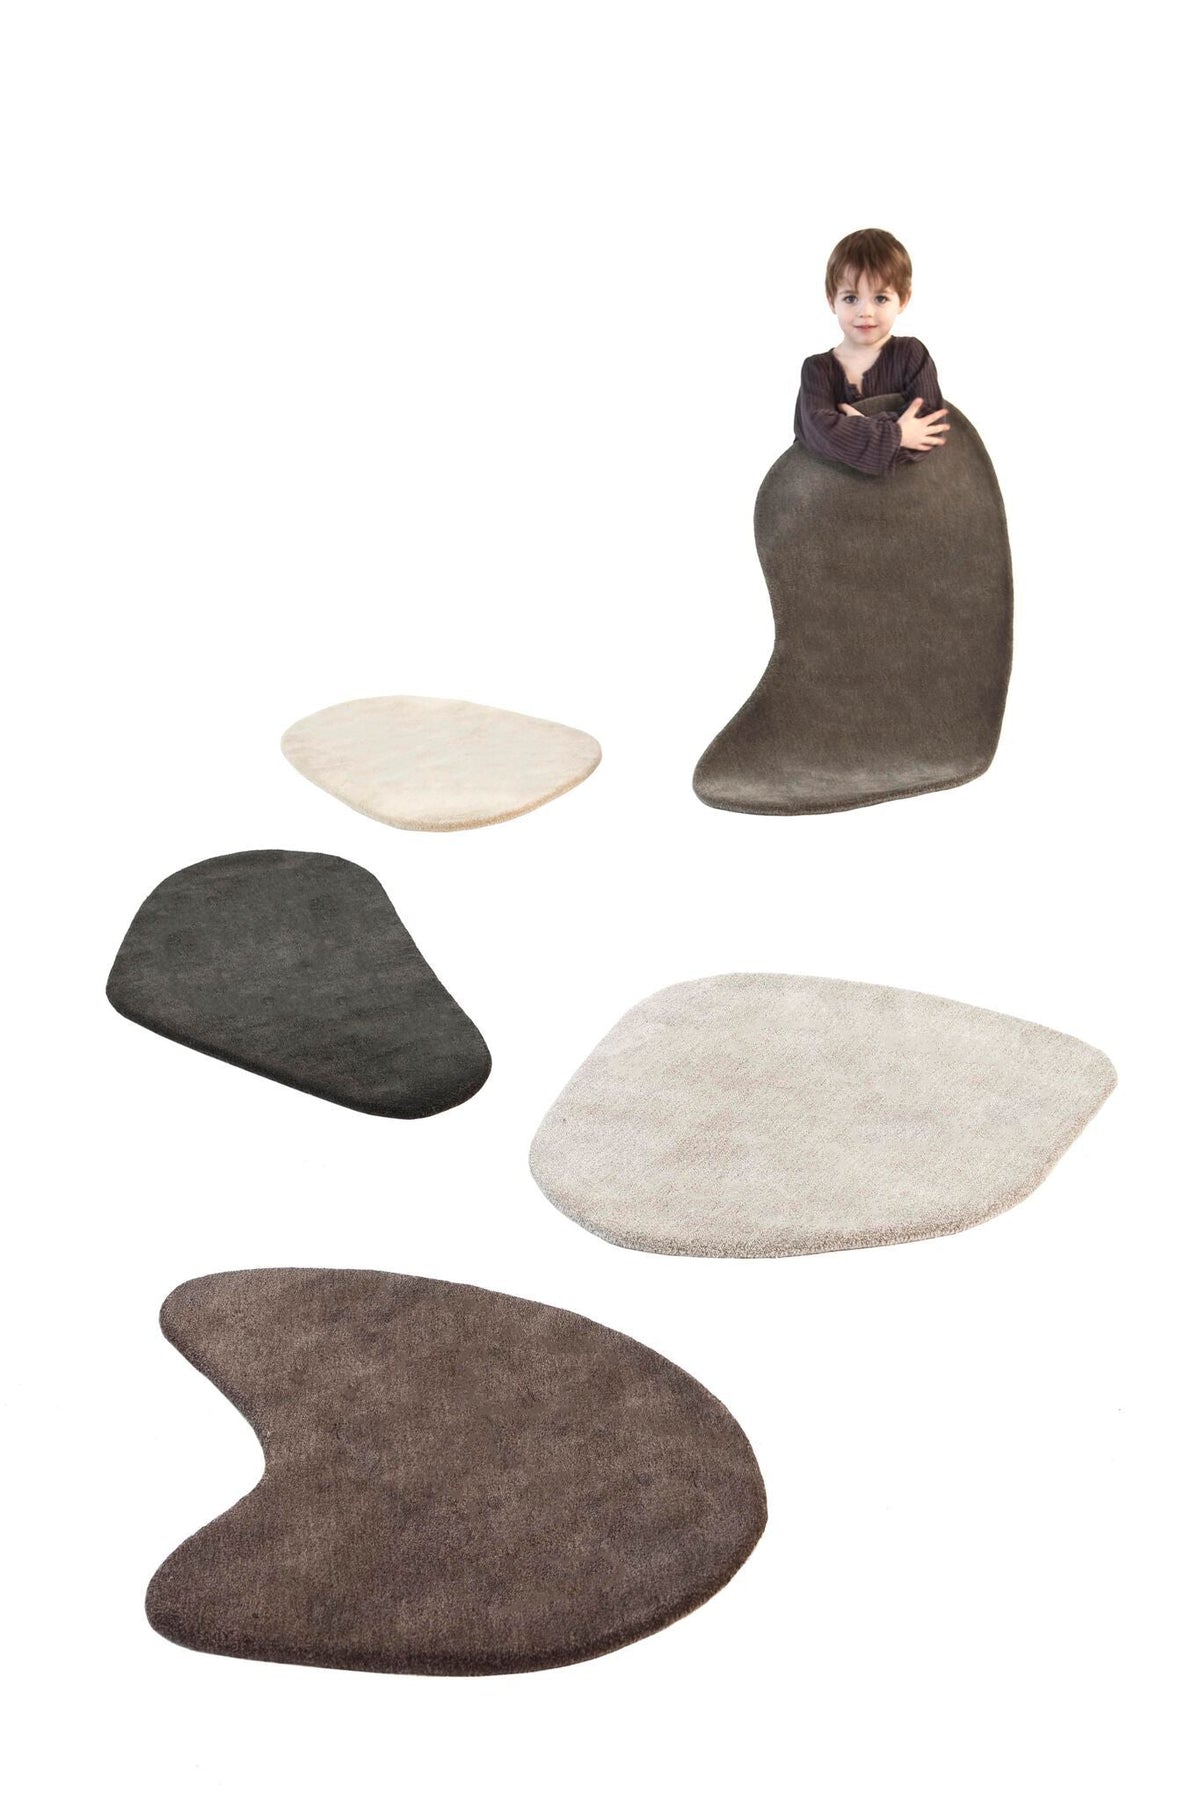 Stone-wool Little Stone 7 Rug-Nanimarquina-Contract Furniture Store